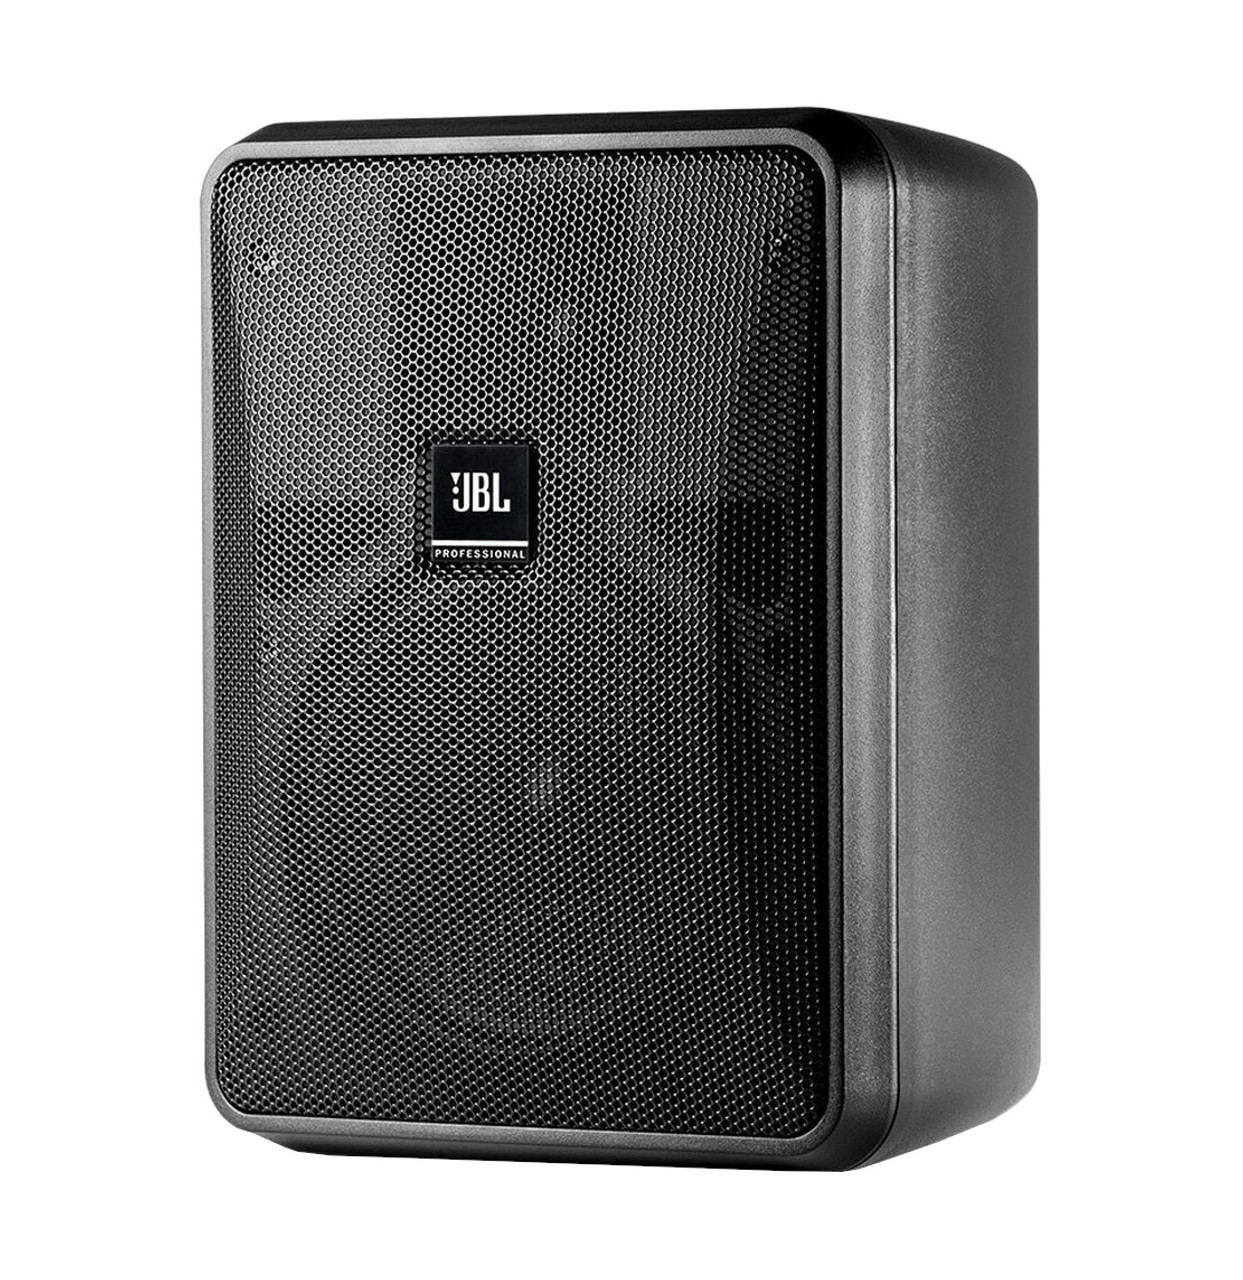 Buy the JBL Model 135 Home Theater System (Set of 5 - Subwoofer